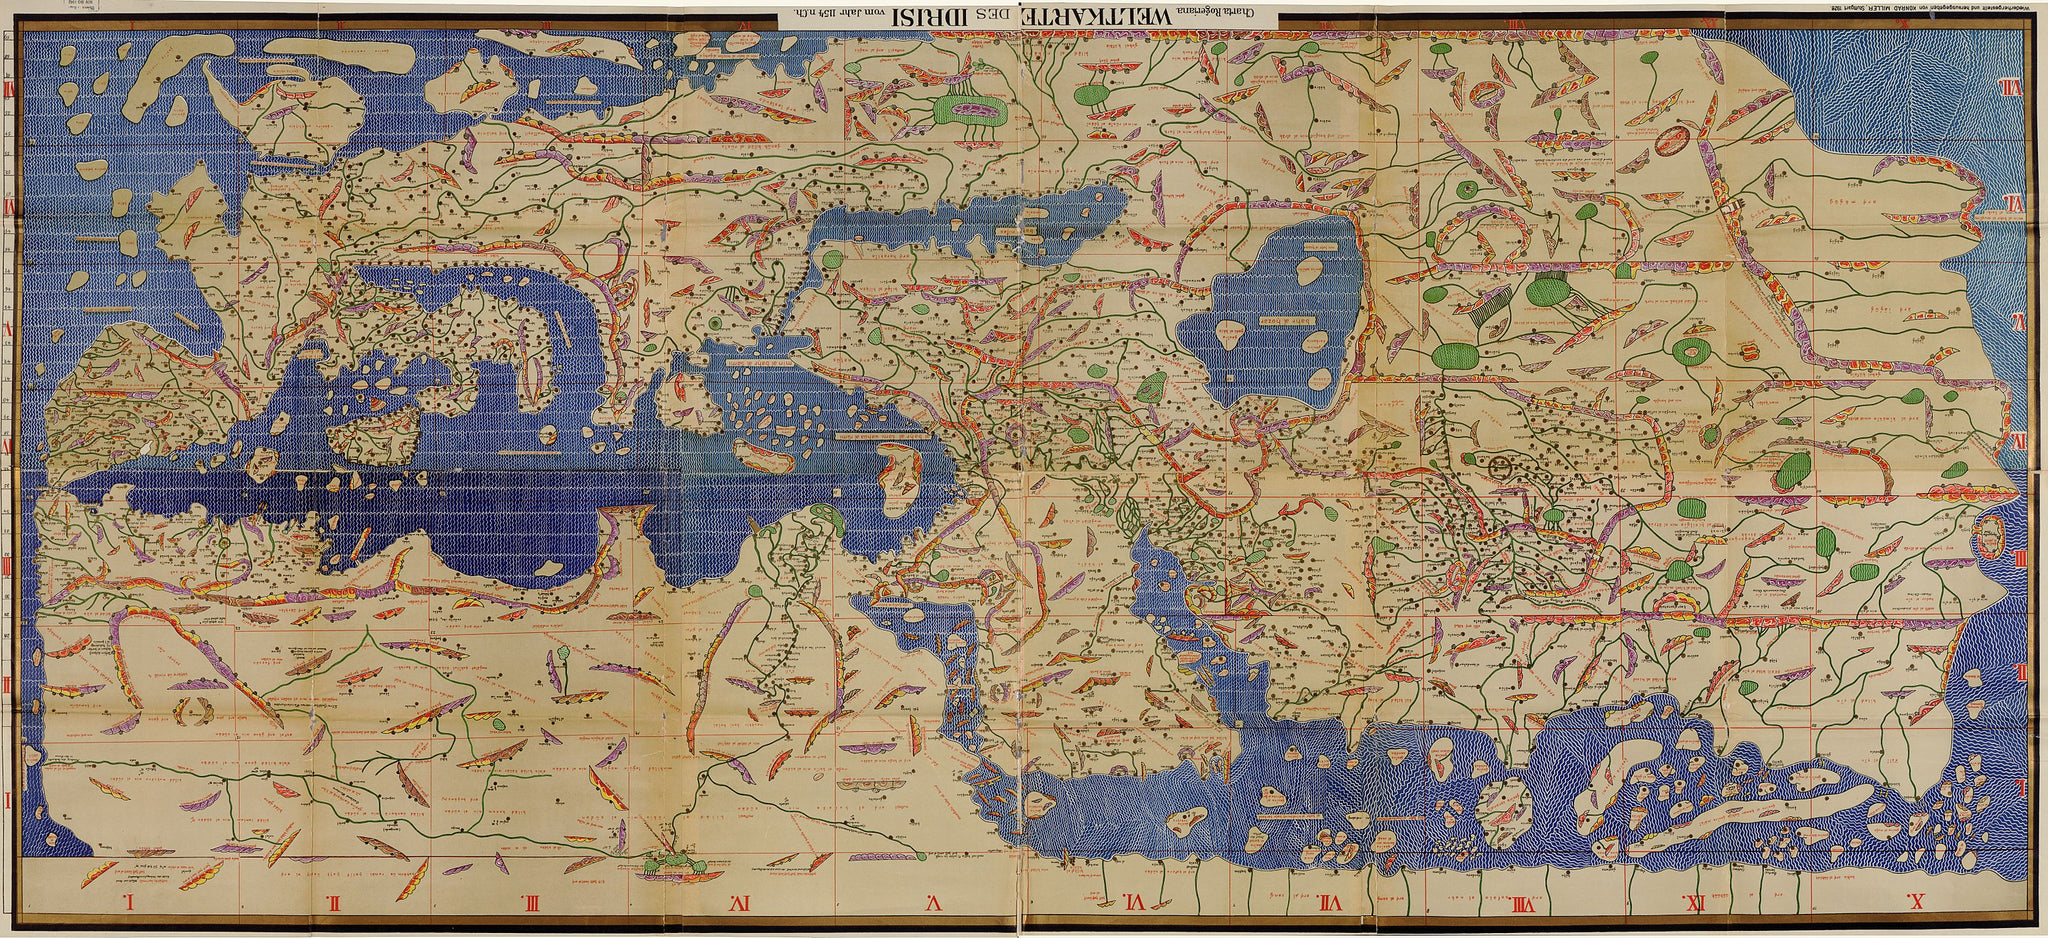 The Story Of Idris – Mapping The World In Medieval Times With Al-Idrisi